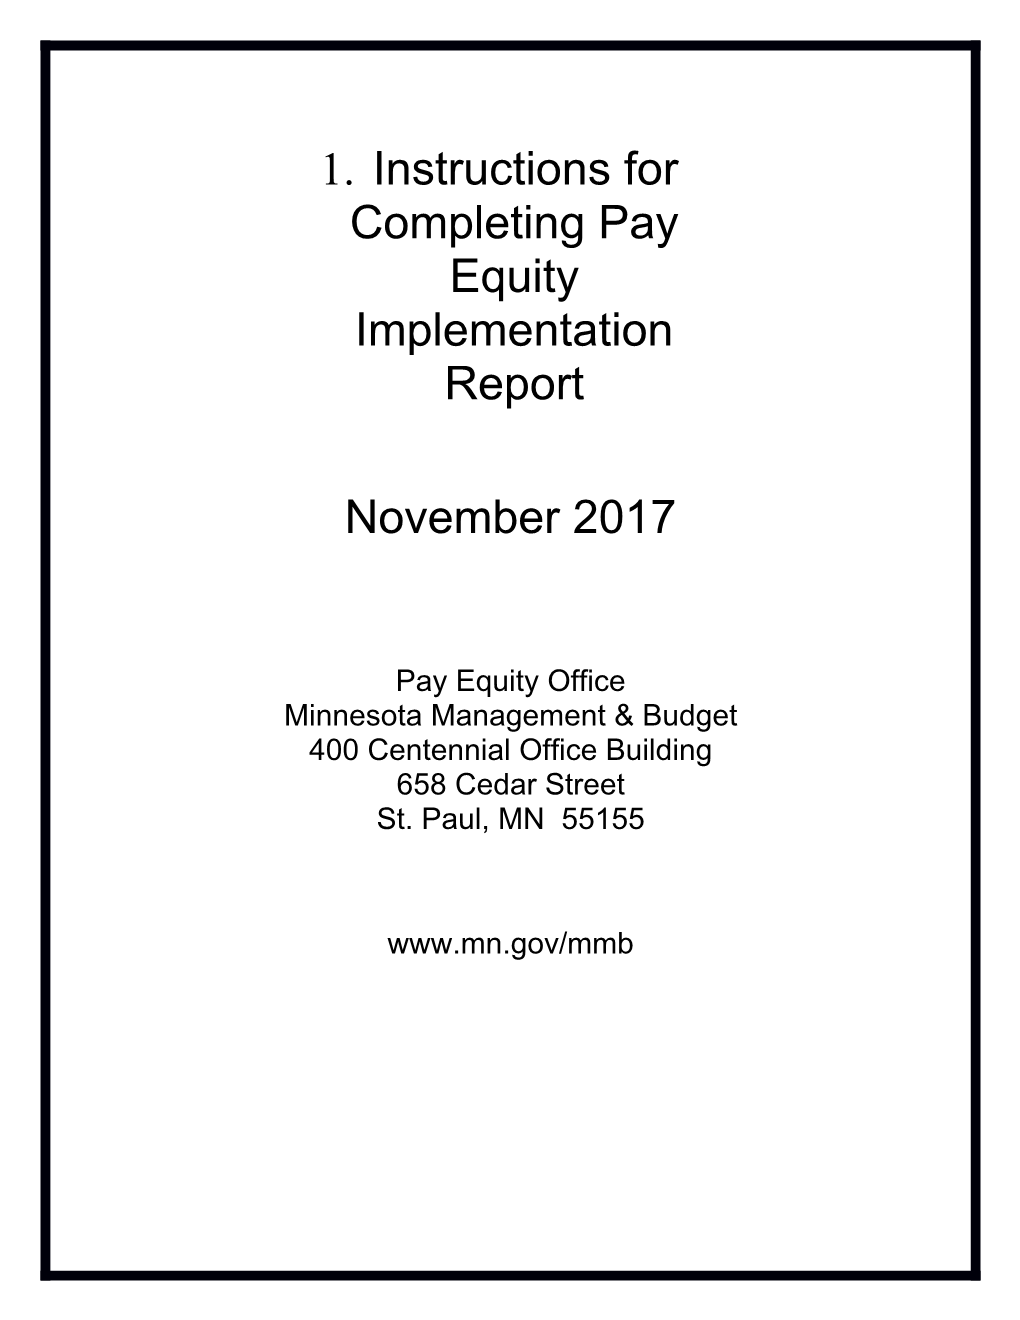 Instructions for Completing Pay Equity